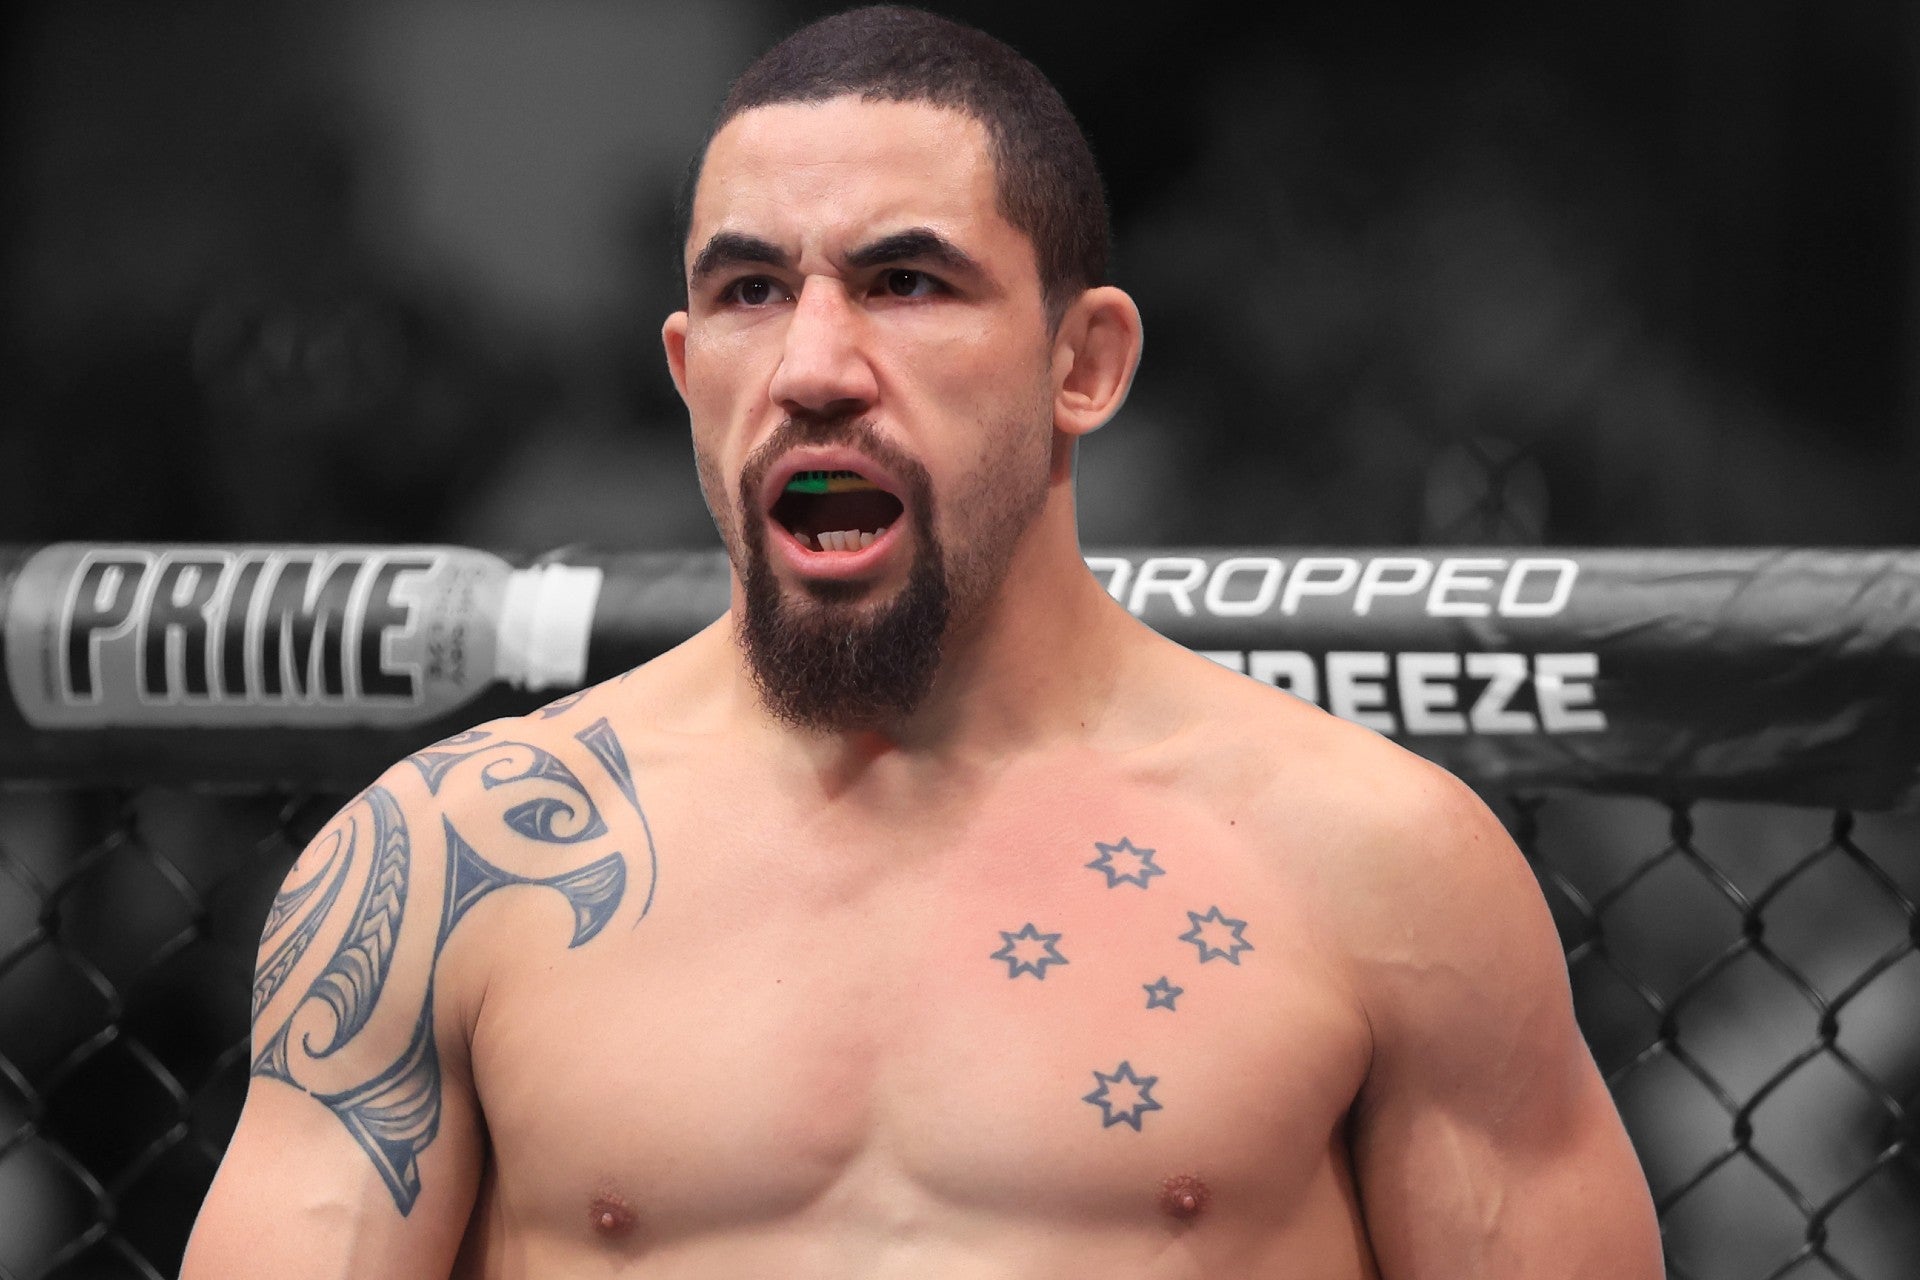 Whittaker is pursuing the UFC middleweight title, which he held from 2018 until 2019